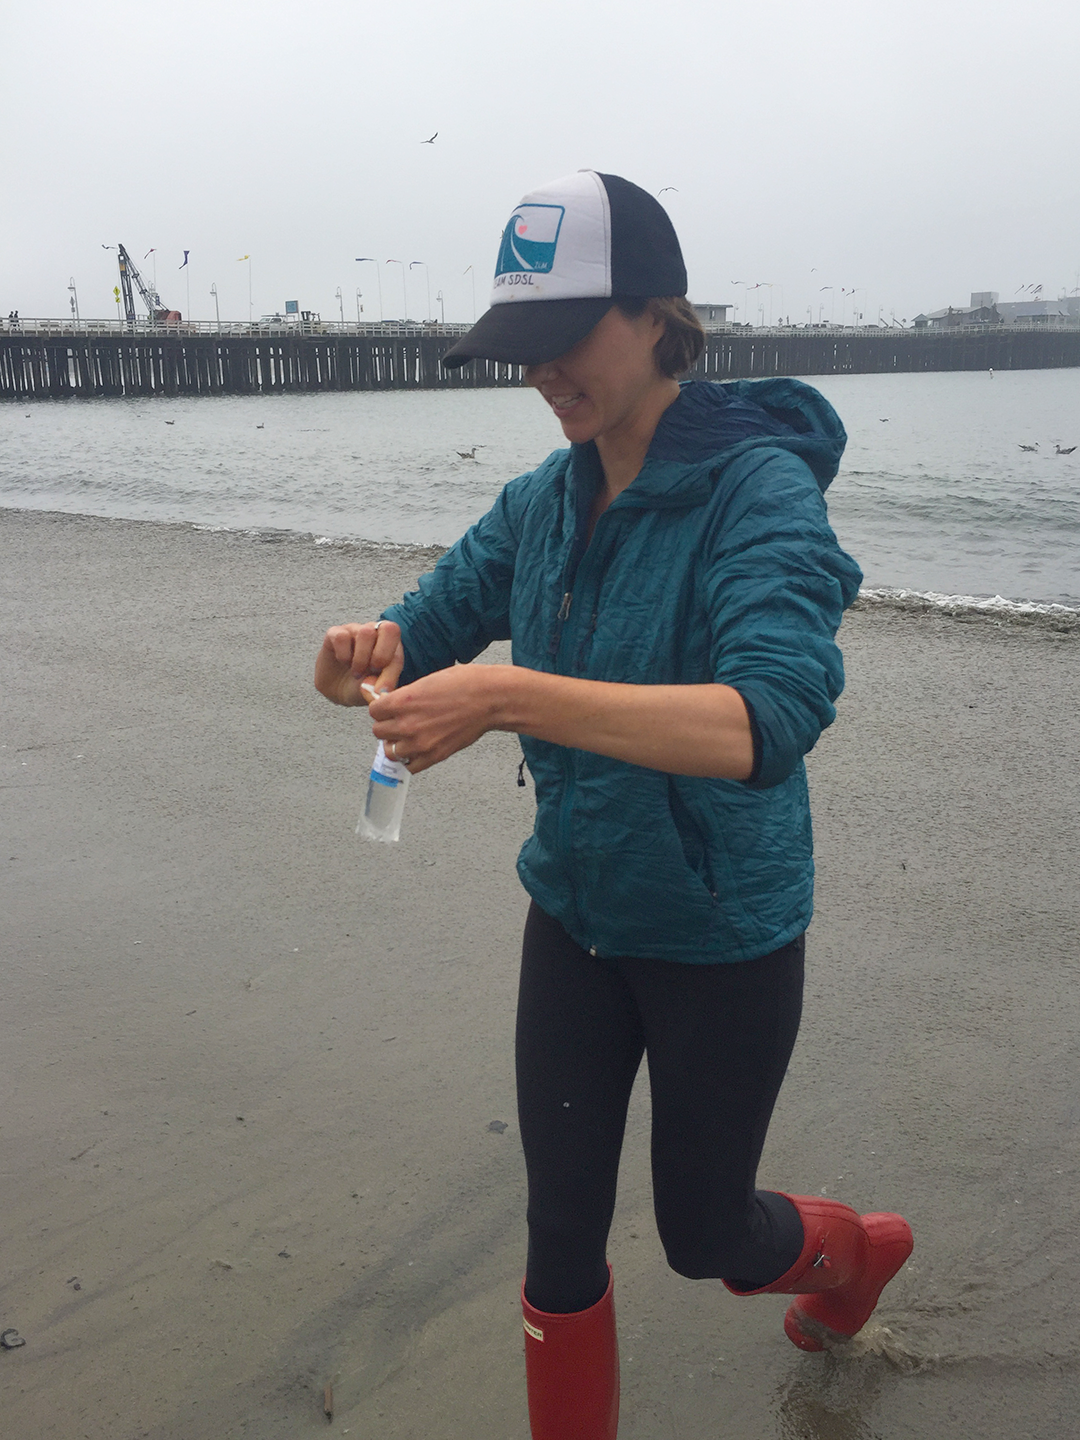 Lark Starkey collecting a water samples from one of California’s consistent “Beach Bummers” for poor water quality – Cowell’s Beach in Santa Cruz. Credit: Karen Black